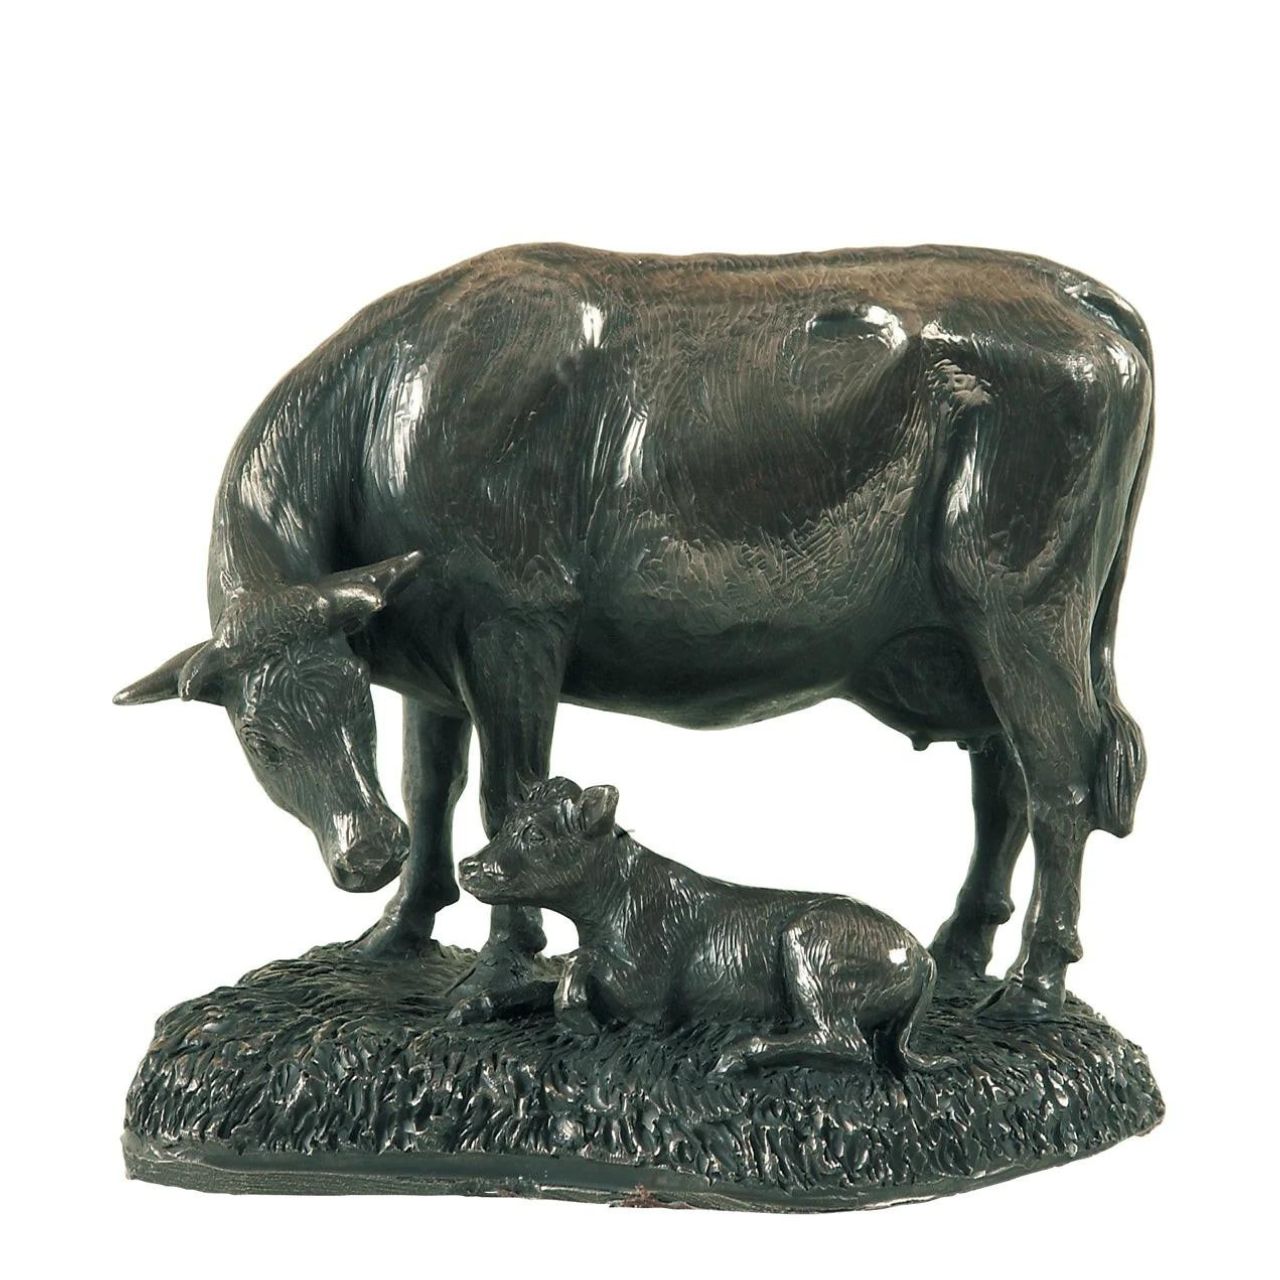 Genesis Cow and Calf  This Genesis Cow and Calf ornament is a rustic farmyard setting cast from bronze.  Genesis Fine Arts has evolved into a much loved and world famous Irish brand to produce a striking range of handcrafted cold cast bronze sculptures.